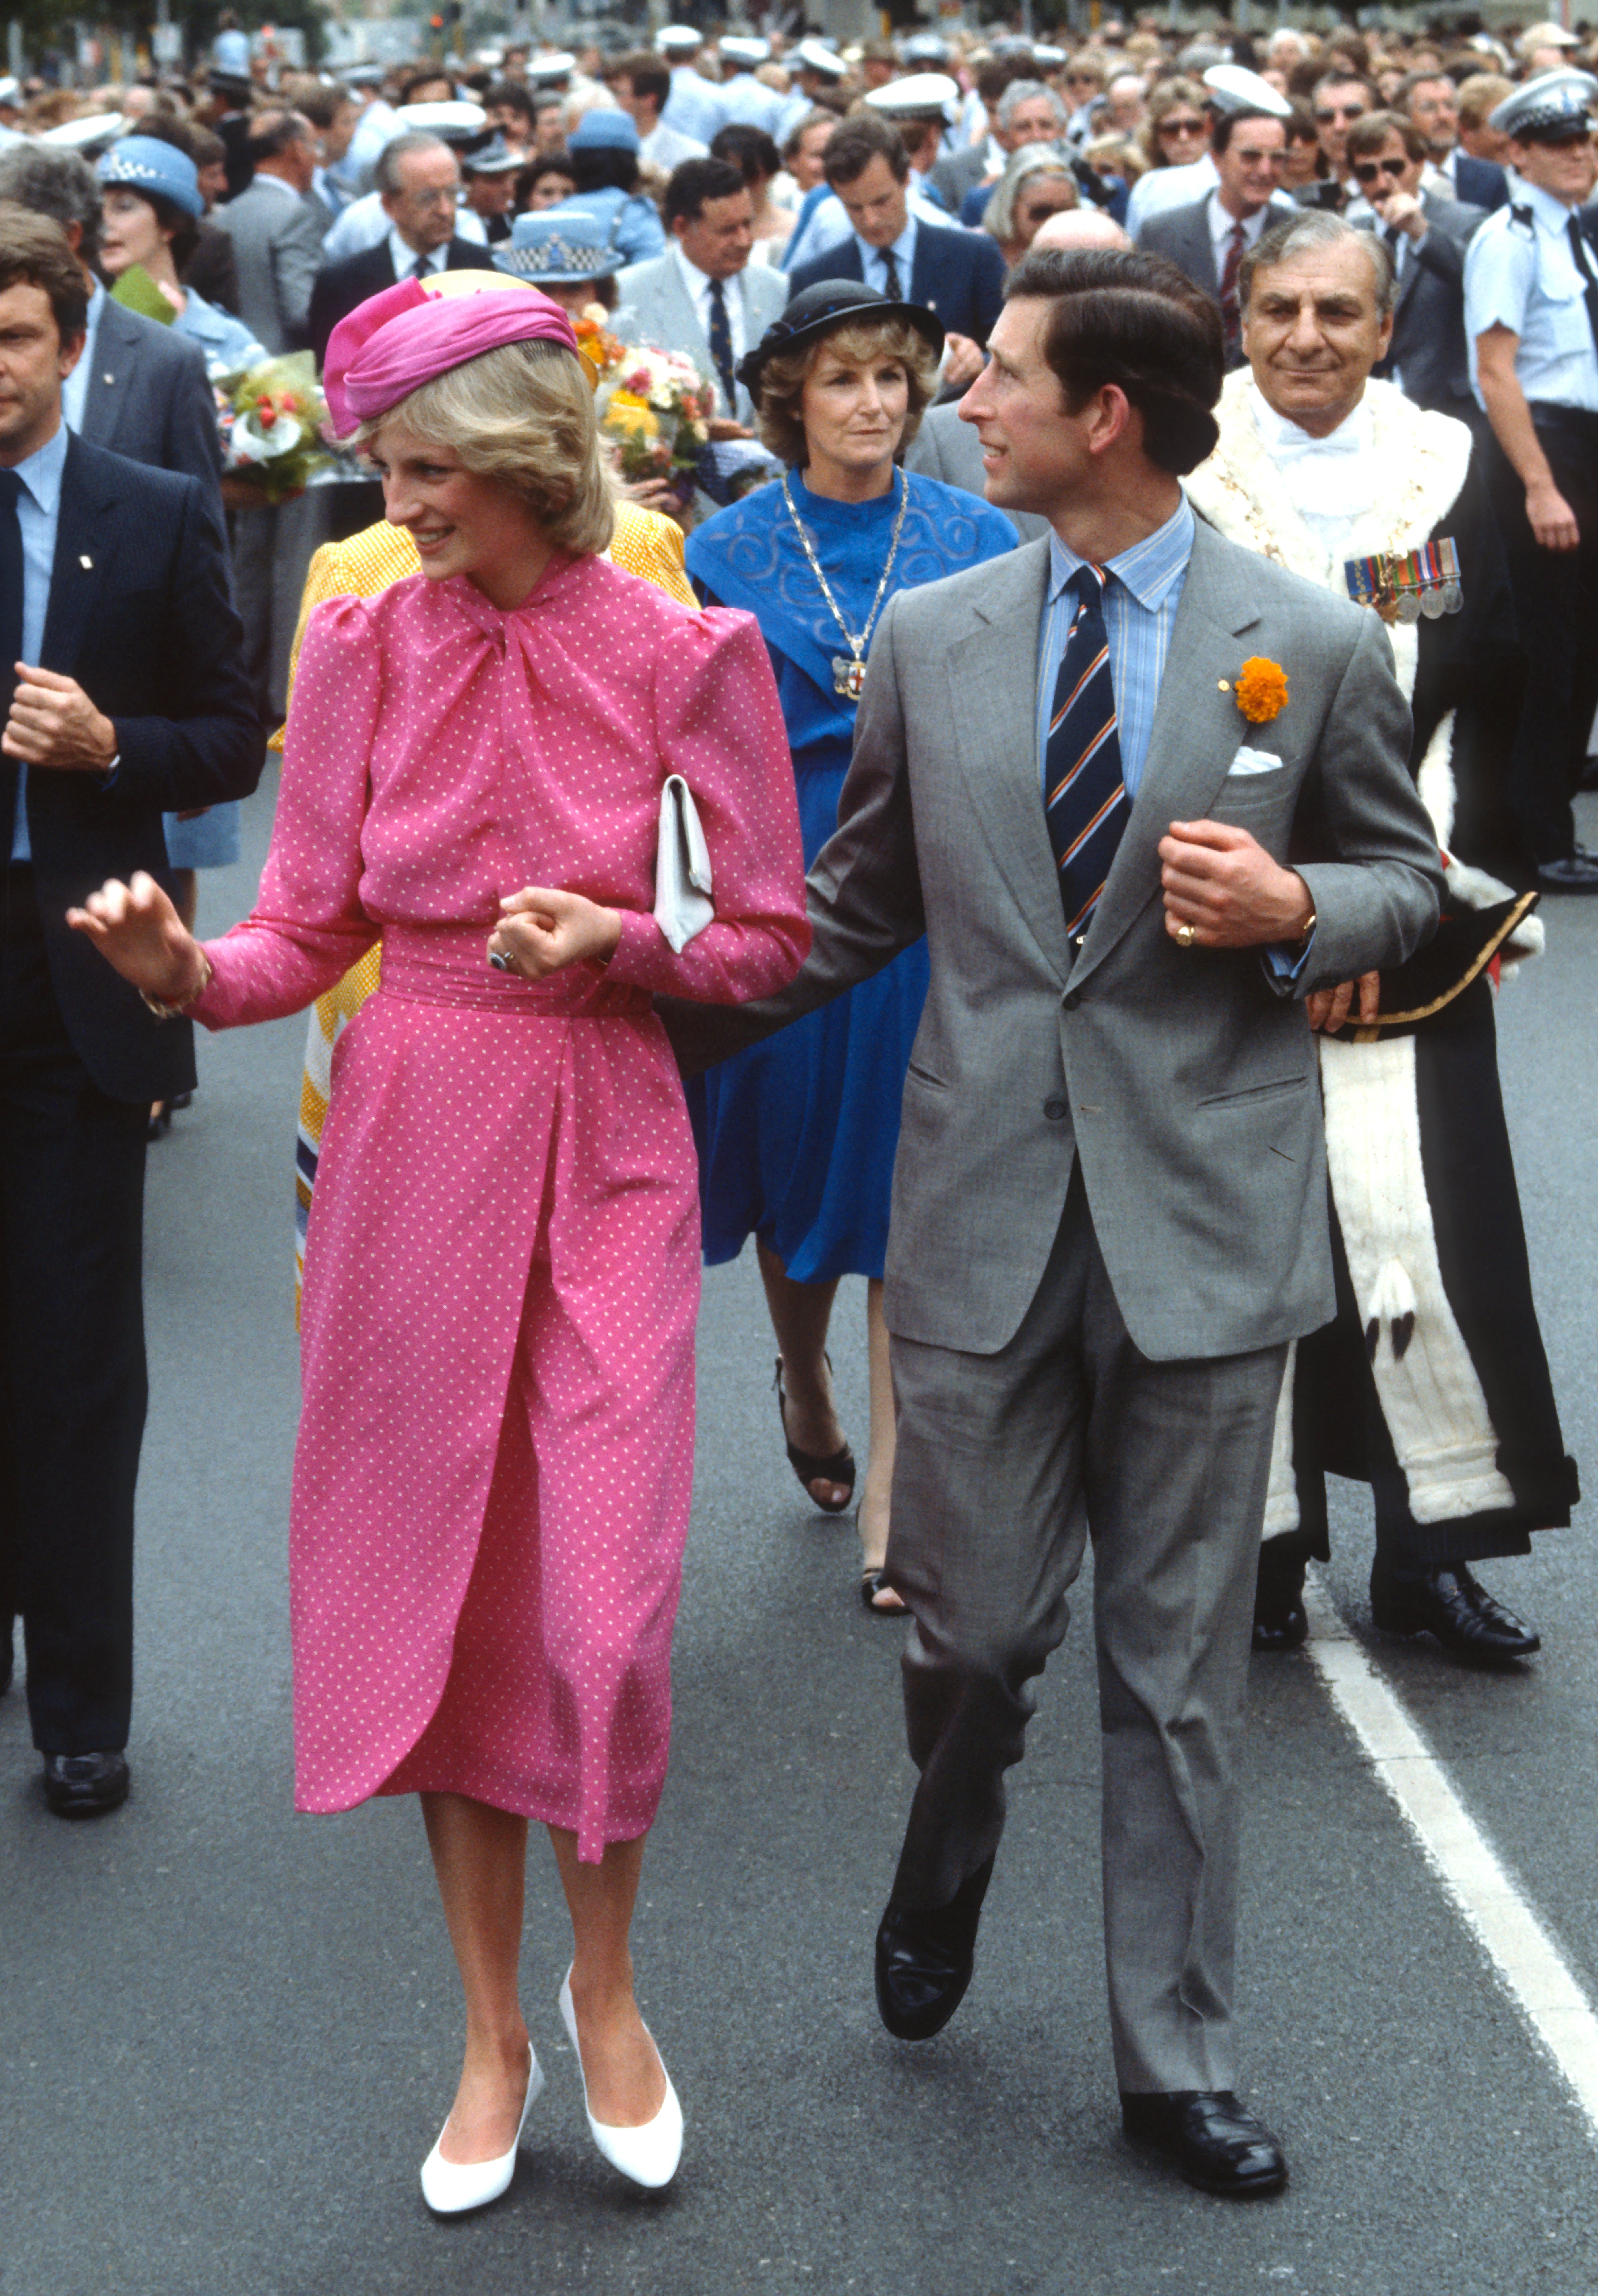 King Charles III and Princess Diana during a walkabout on April 7, 1983 in Perth, Australia. | Source: Getty Images